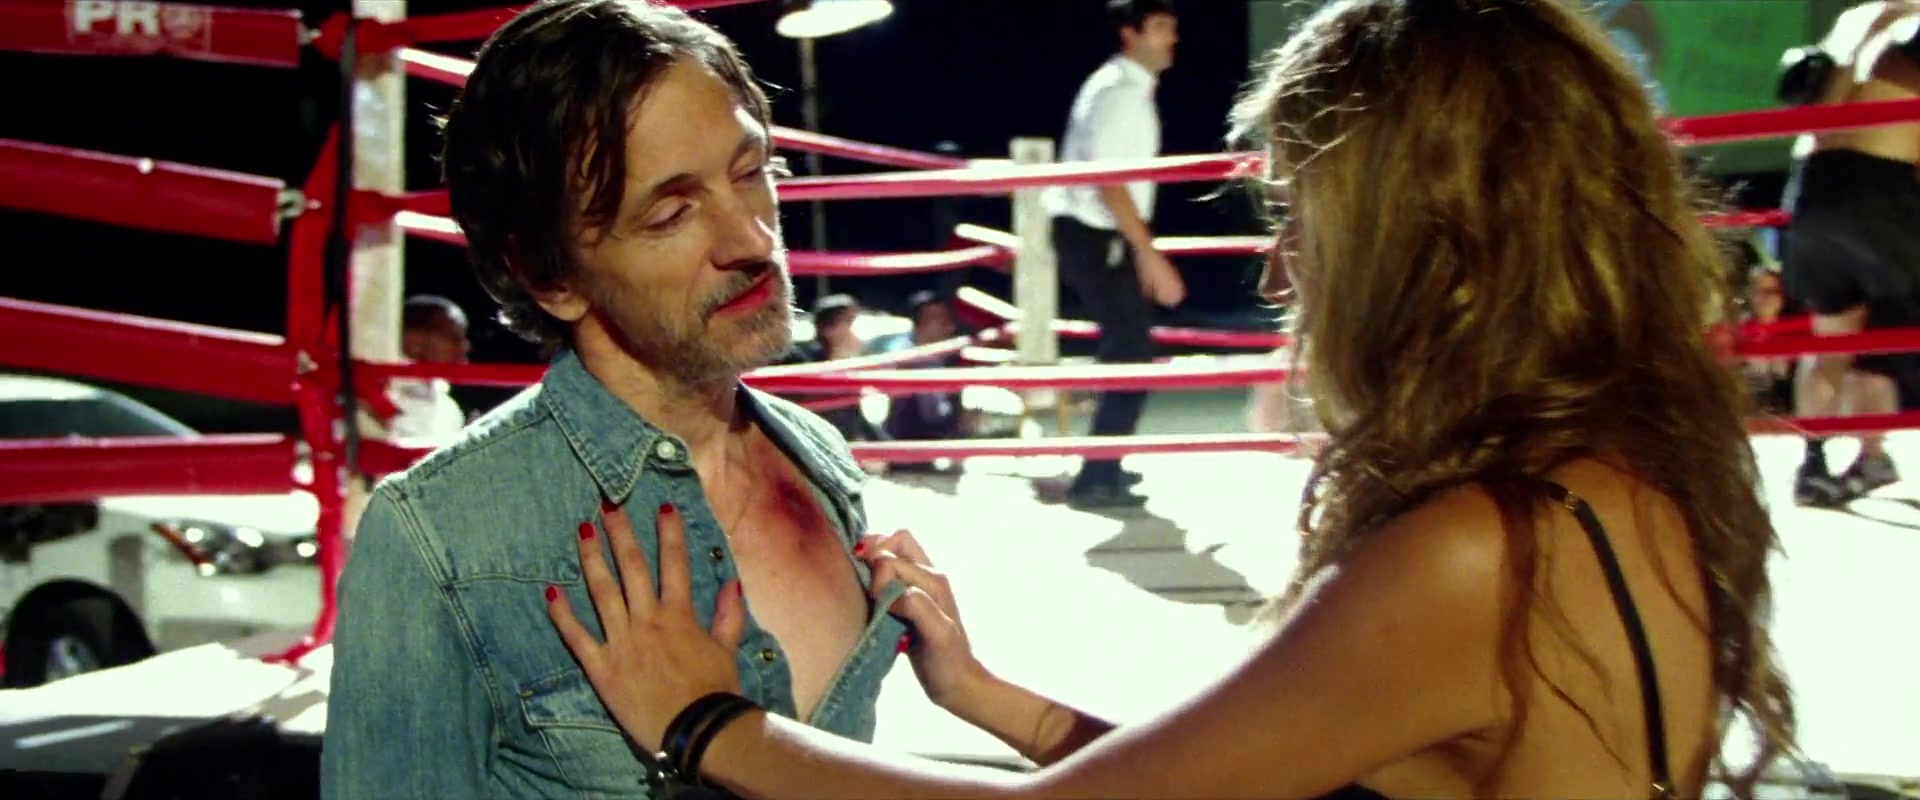 Dichen Lachman boxing ring girl scene from Too Late